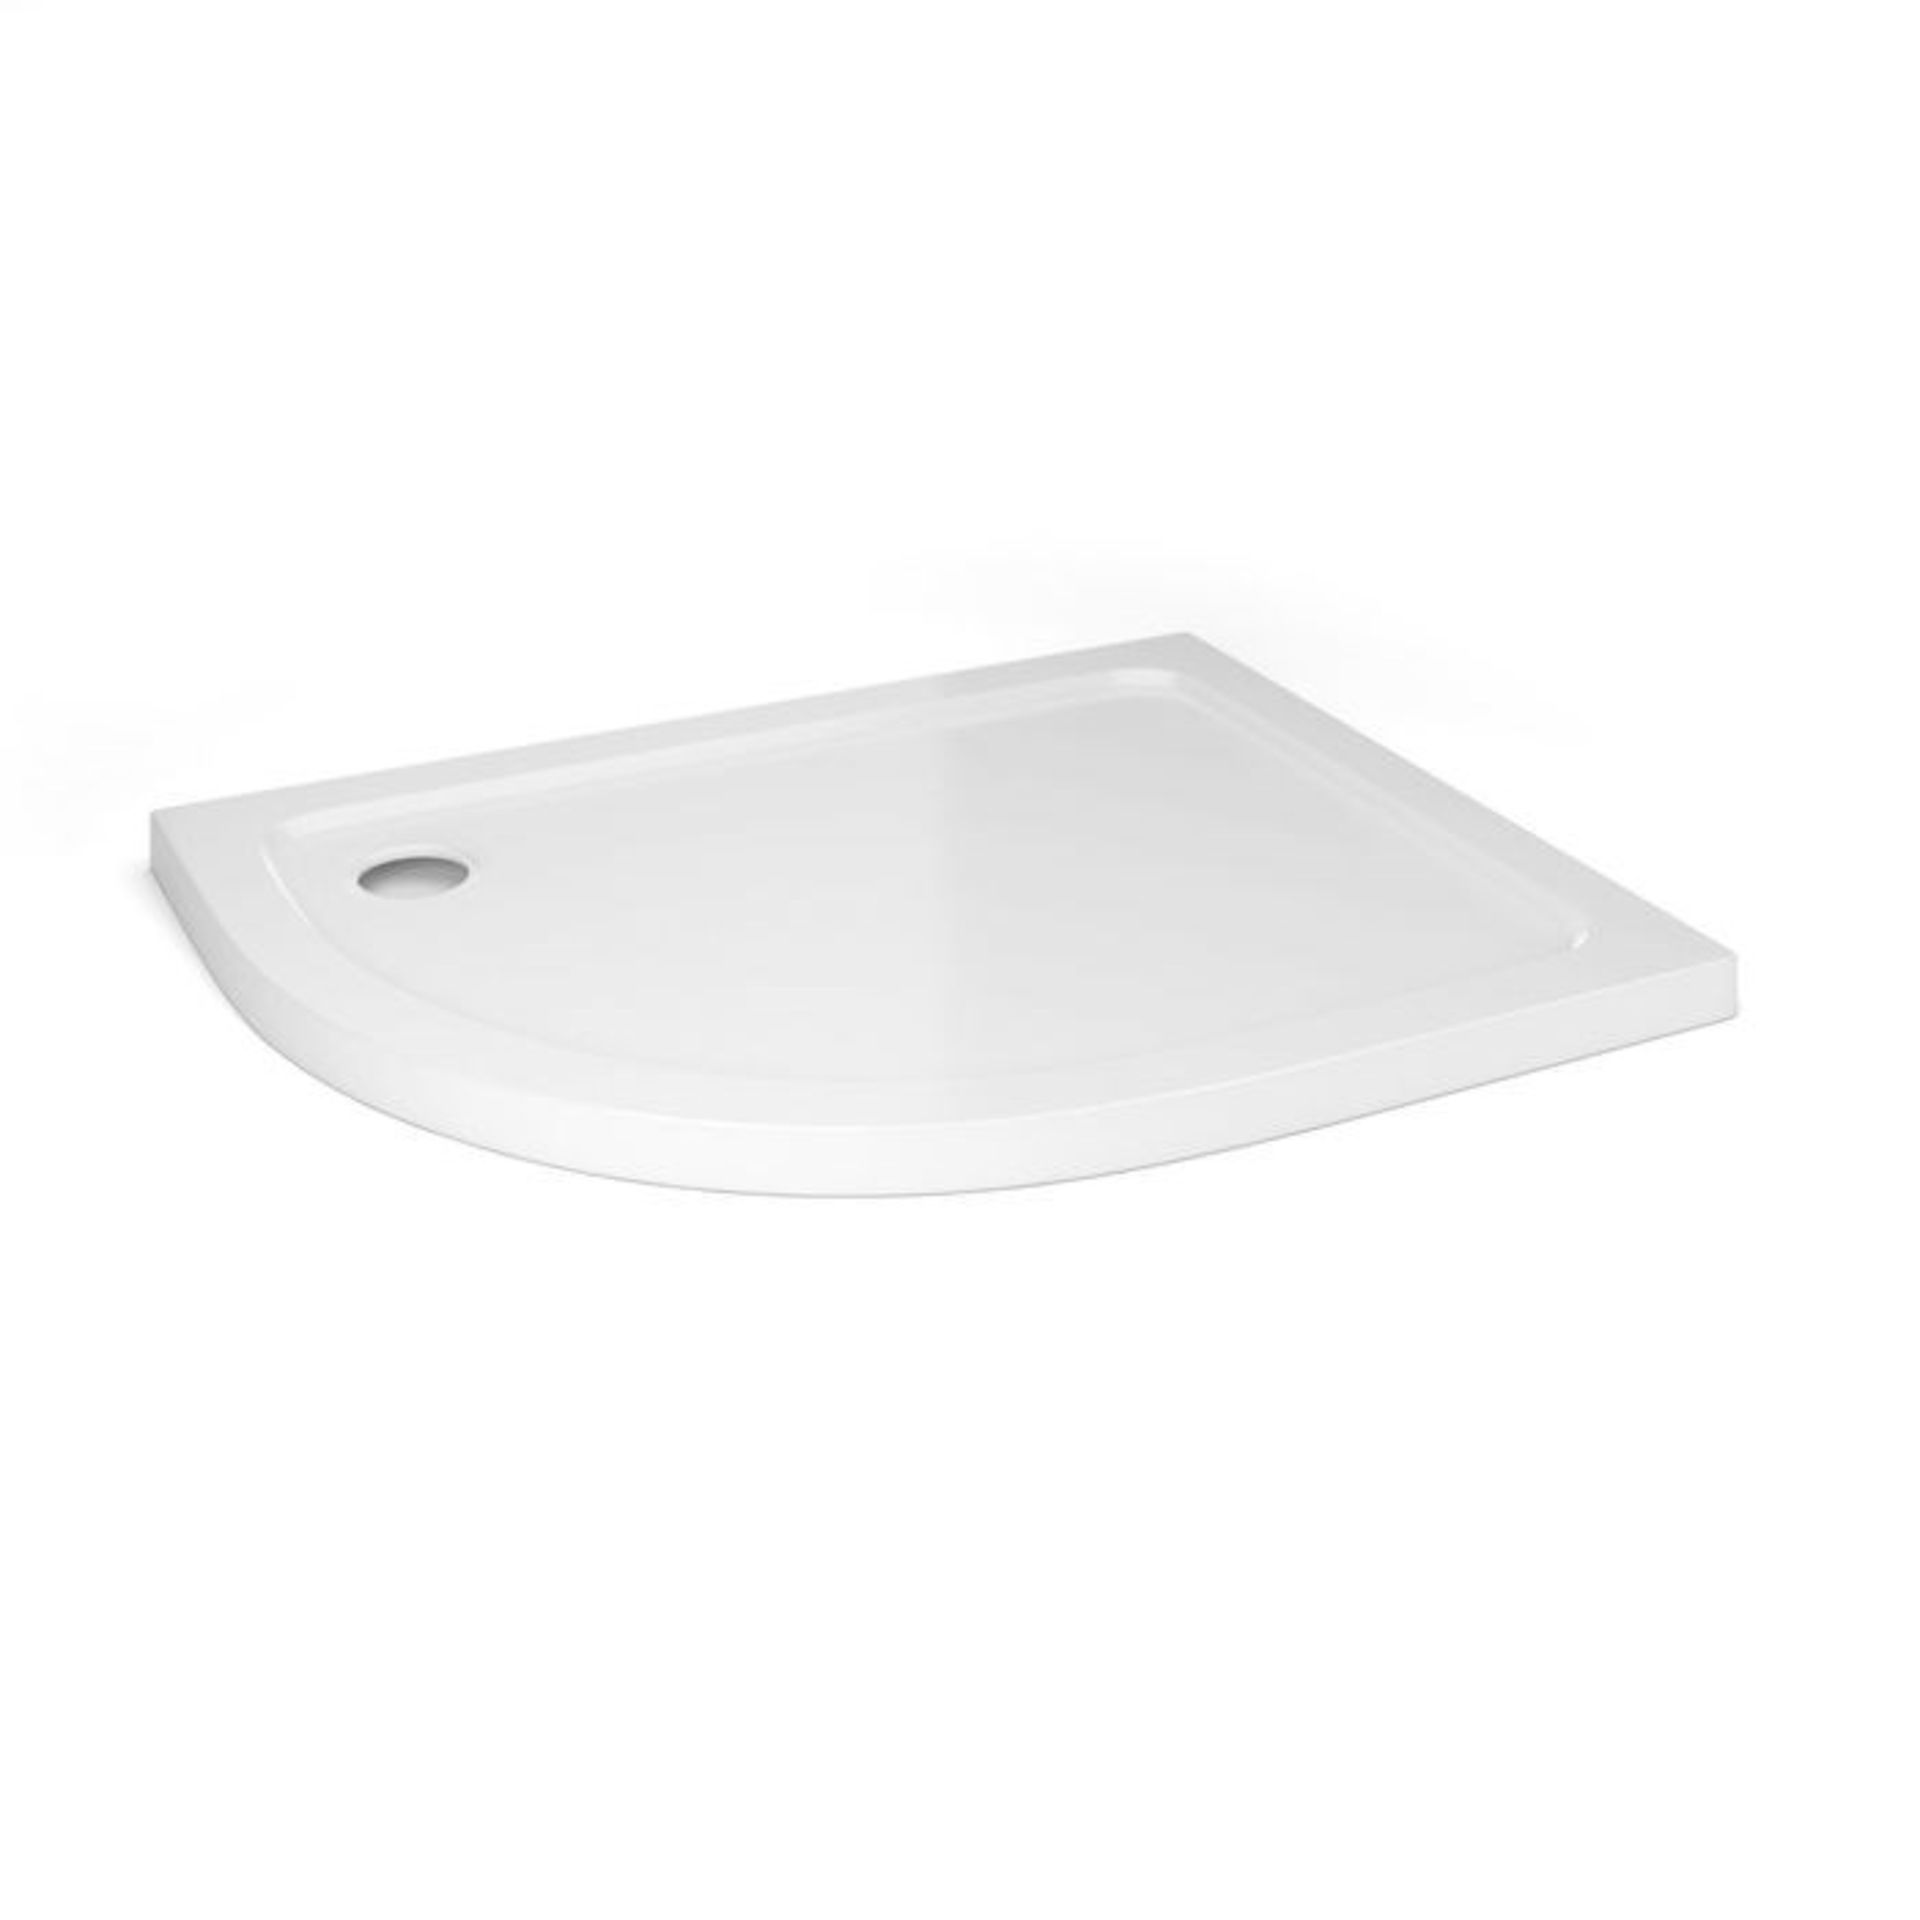 Brand New (DW24) 1000x800mm Offset Quadrant Ultra Slim Stone Shower Tray - Left.Constructed from acr - Image 2 of 2